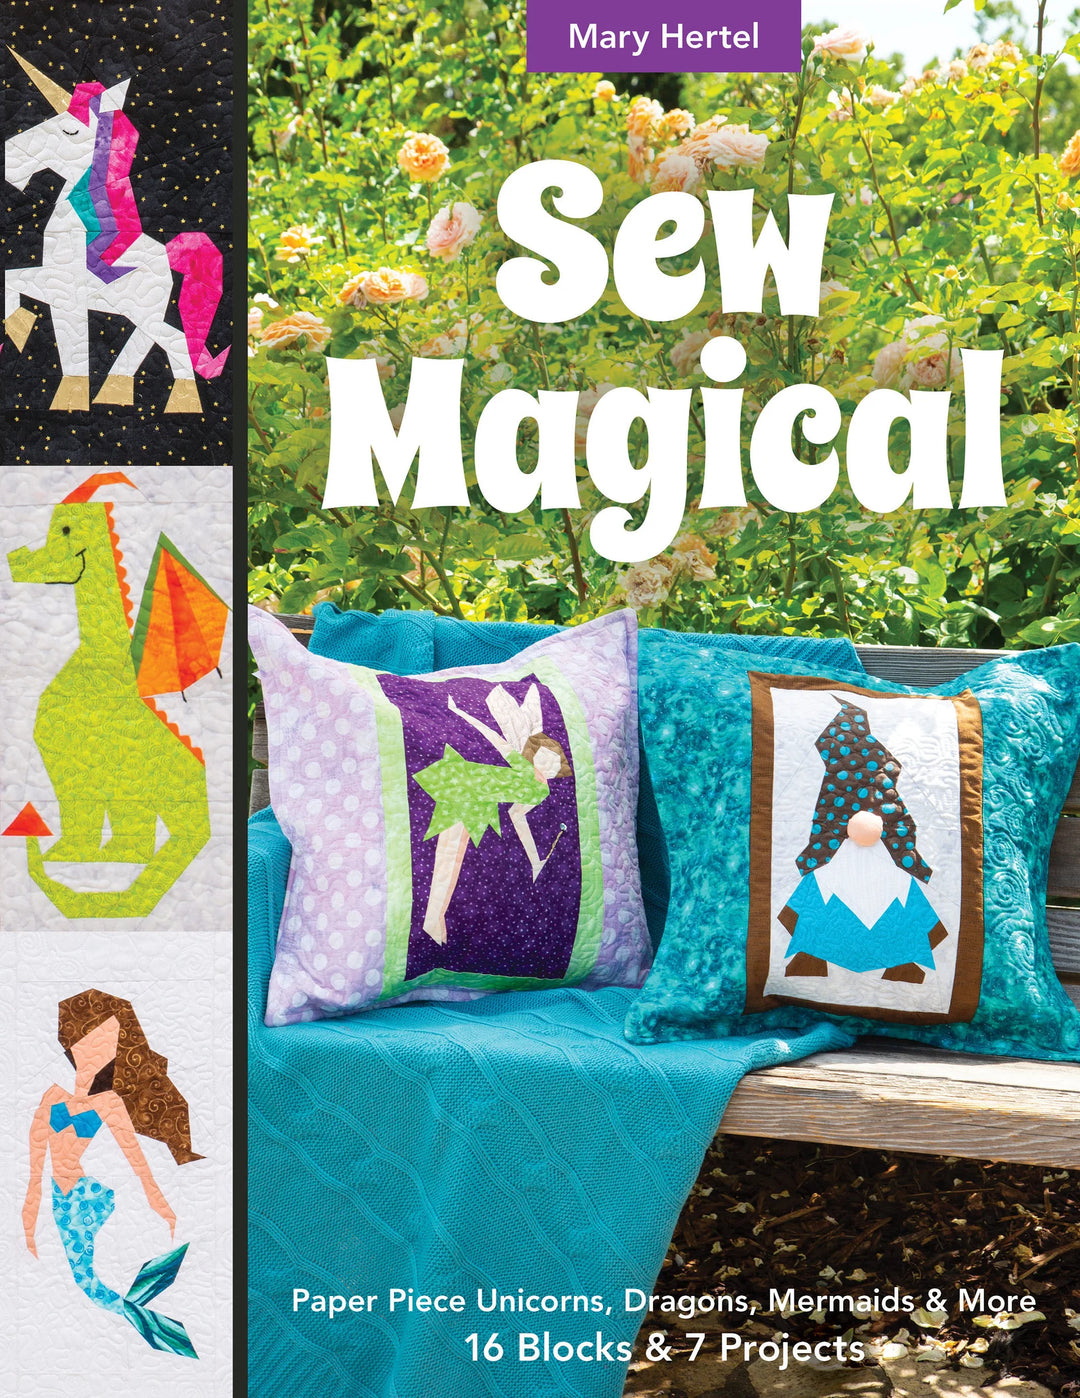 Sew Magical - Make Believe Quilts and Projects!